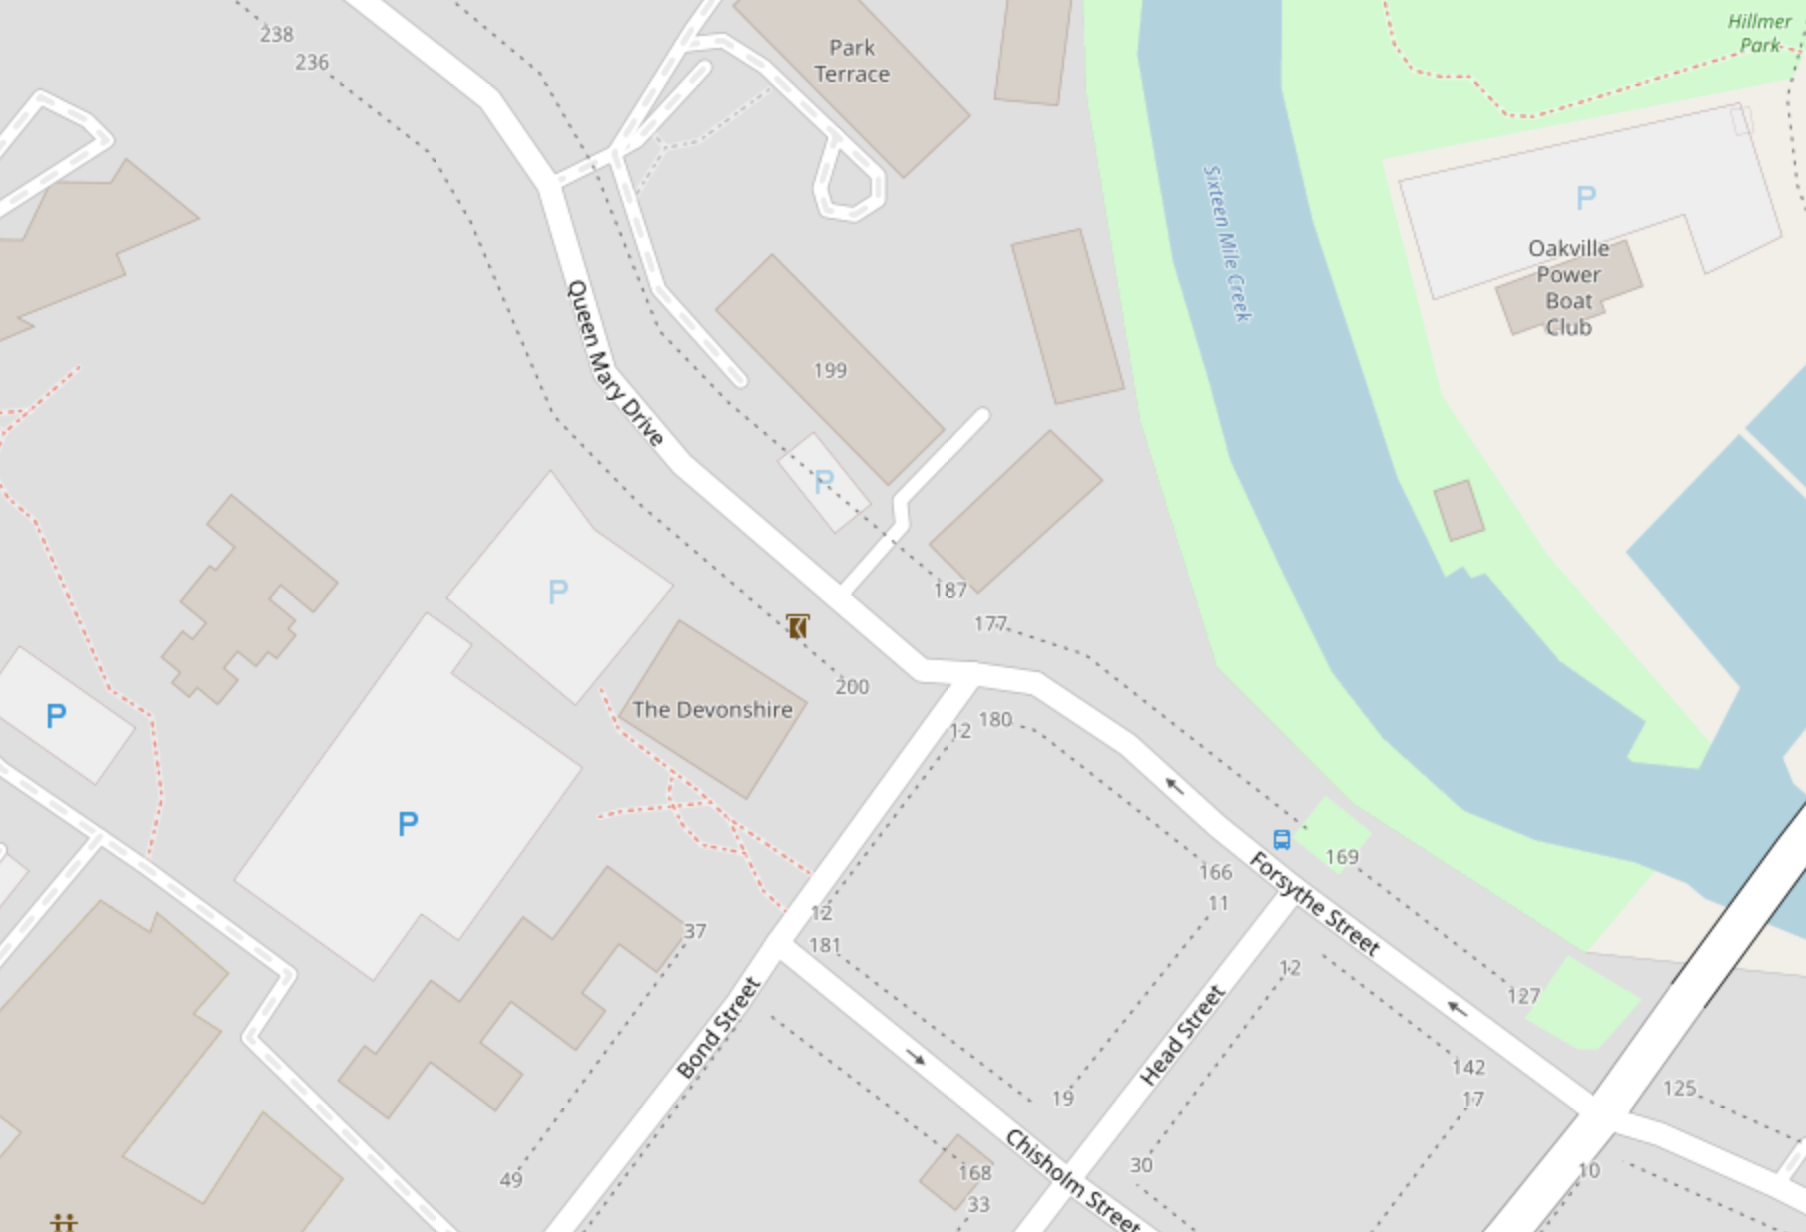 Queen Mary Dr and Bond St | Openstreetmap